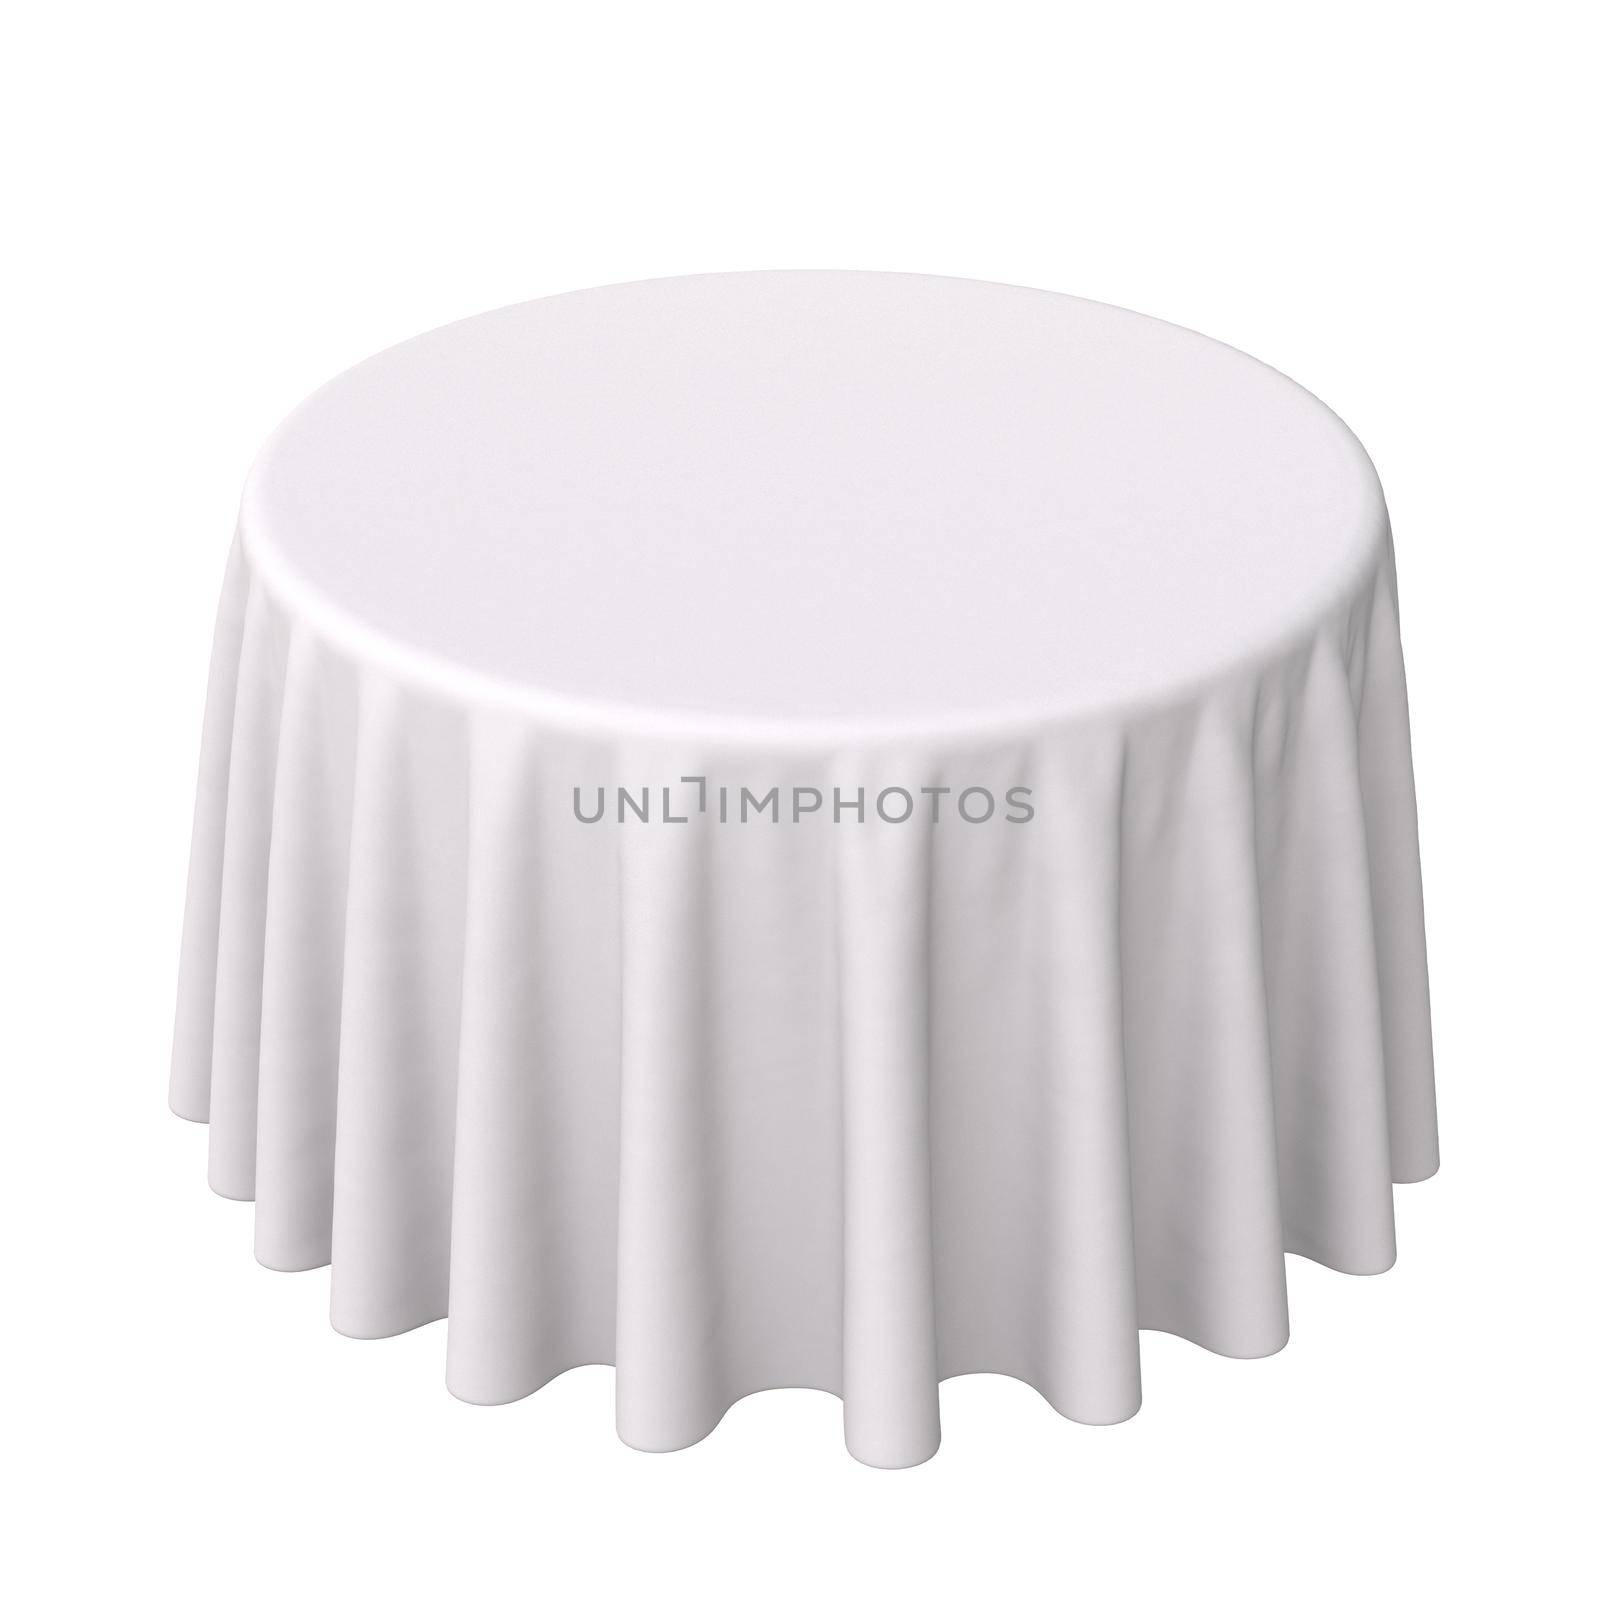 White round tablecloth 3D rendering illustration isolated on white background